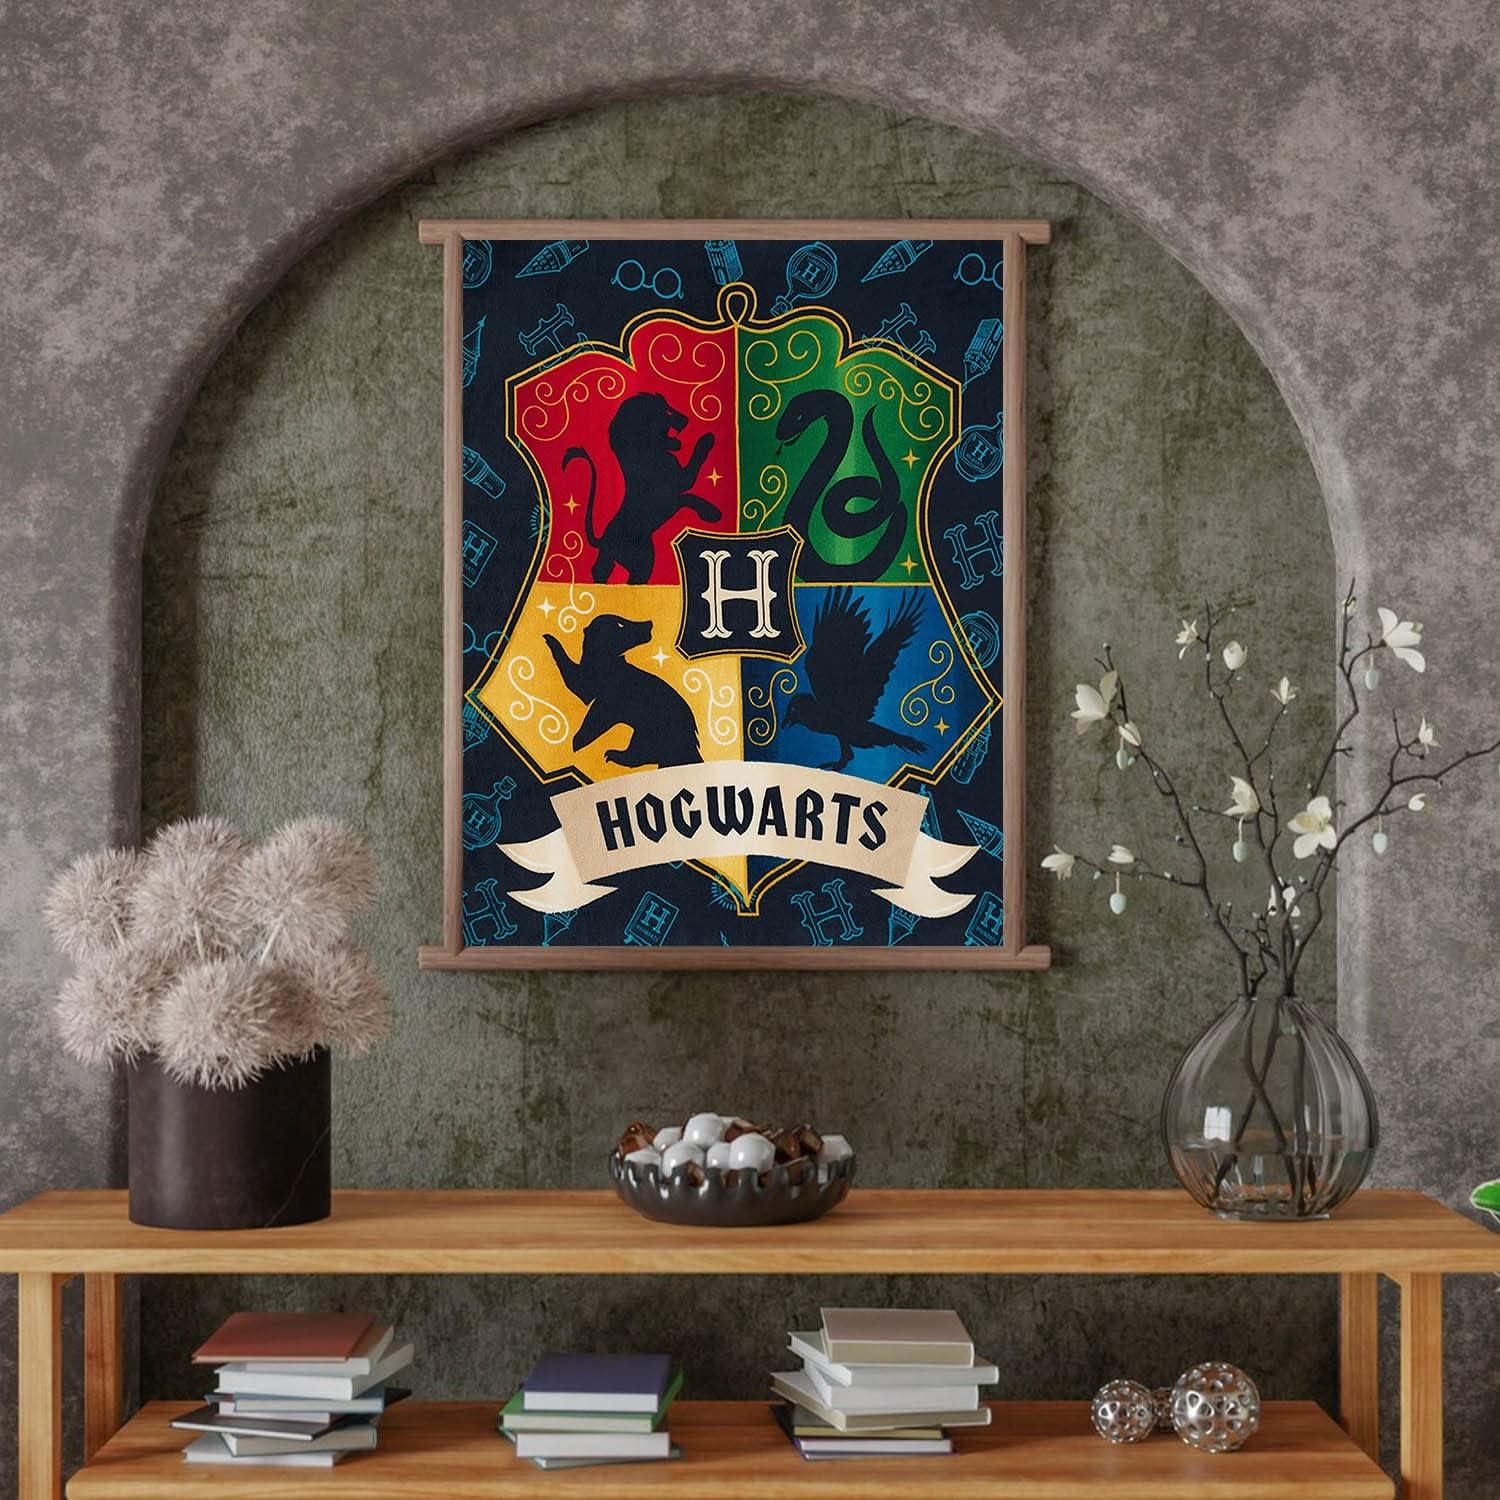 Harry Potter Cross Stitch Kits For Adults - Stamped Crossstitching Kits  Preprinted 11 Count Cross-Stitch Kit For Beginner, 11CT Prestamped Easy  Pattern Needlepoint Kits Crafts For Decor 11.8x15.7inch : : Home